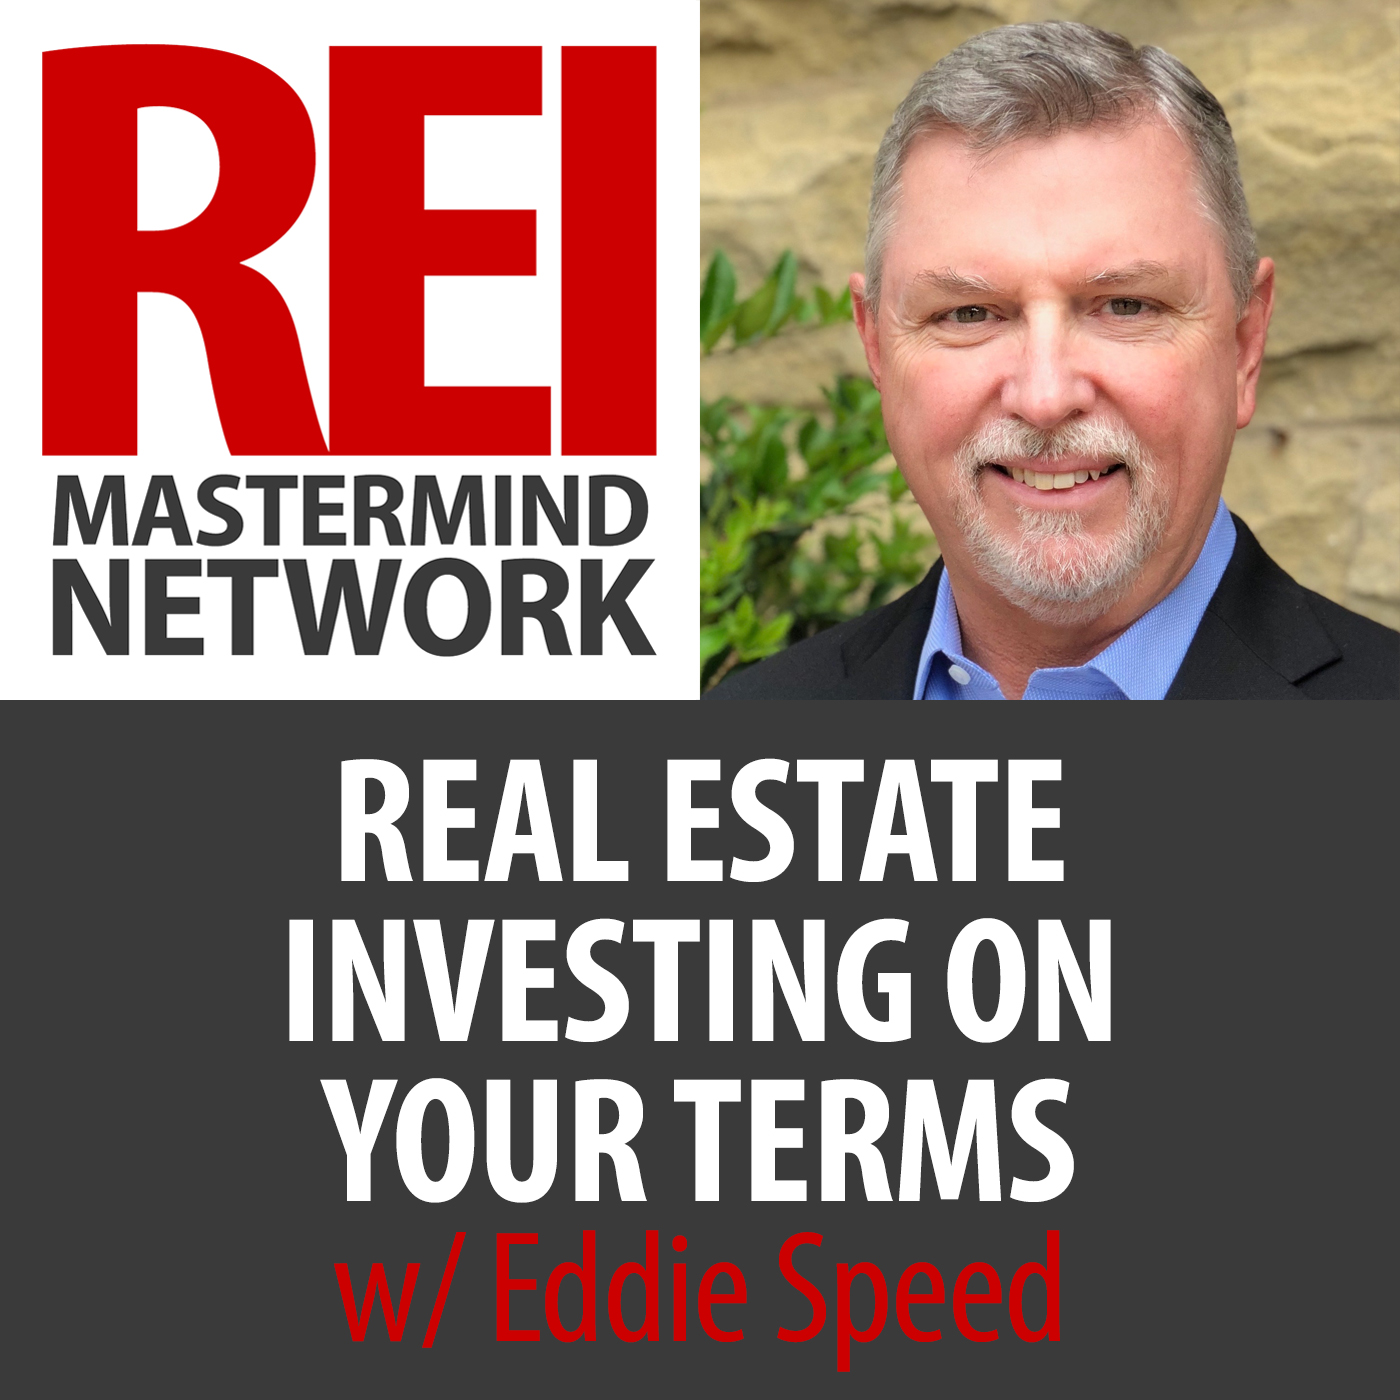 Real Estate Investing On Your Terms with Eddie Speed #222 Image